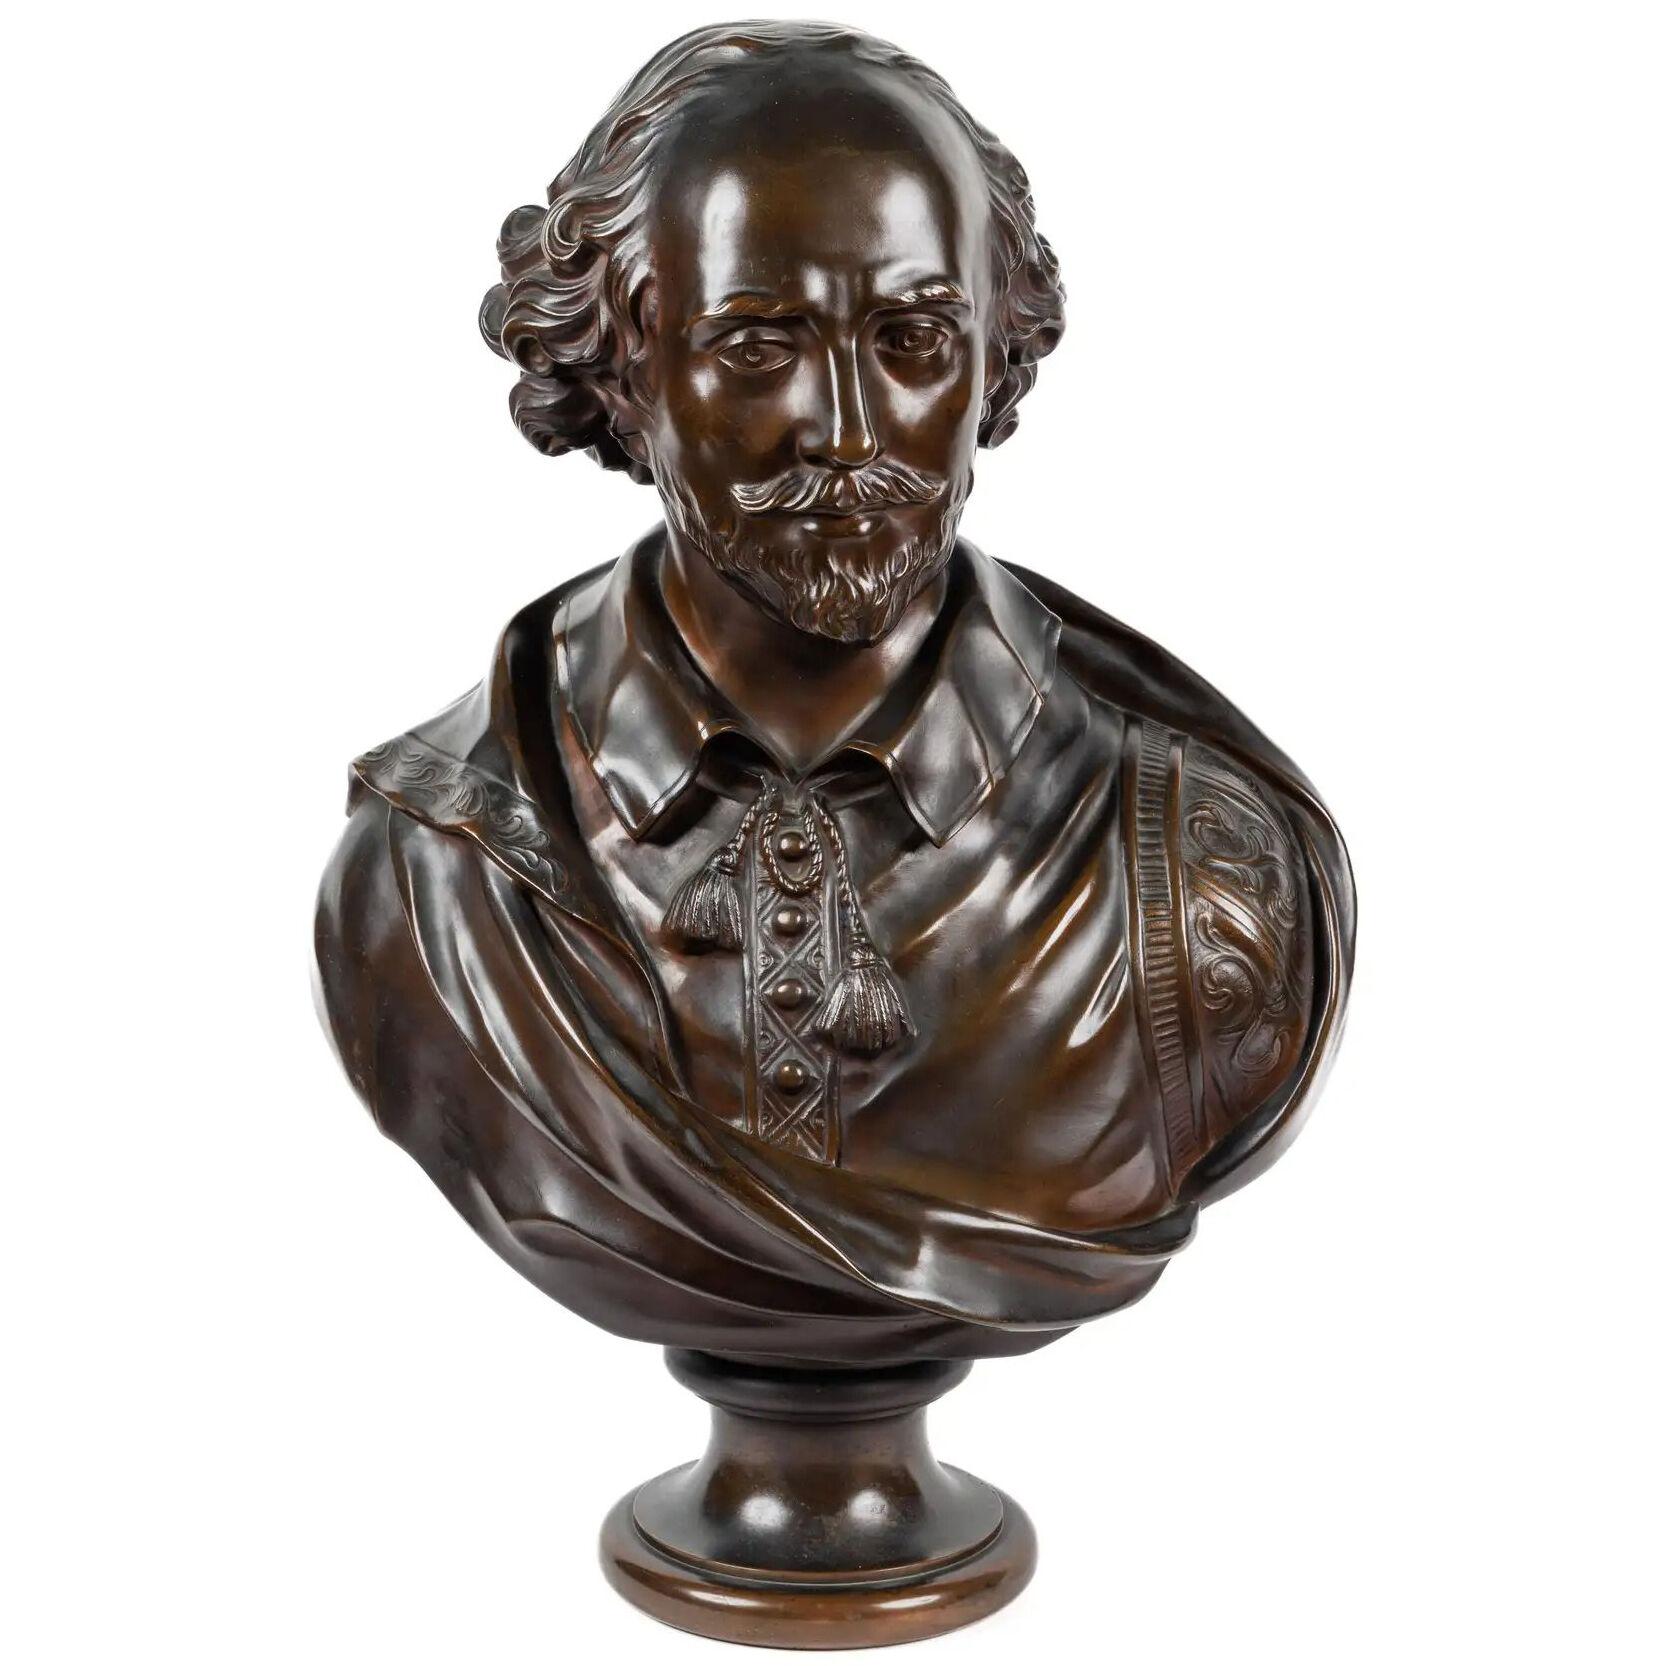 A Monumental French Patinated Bronze Bust of William Shakespeare, after Houdon